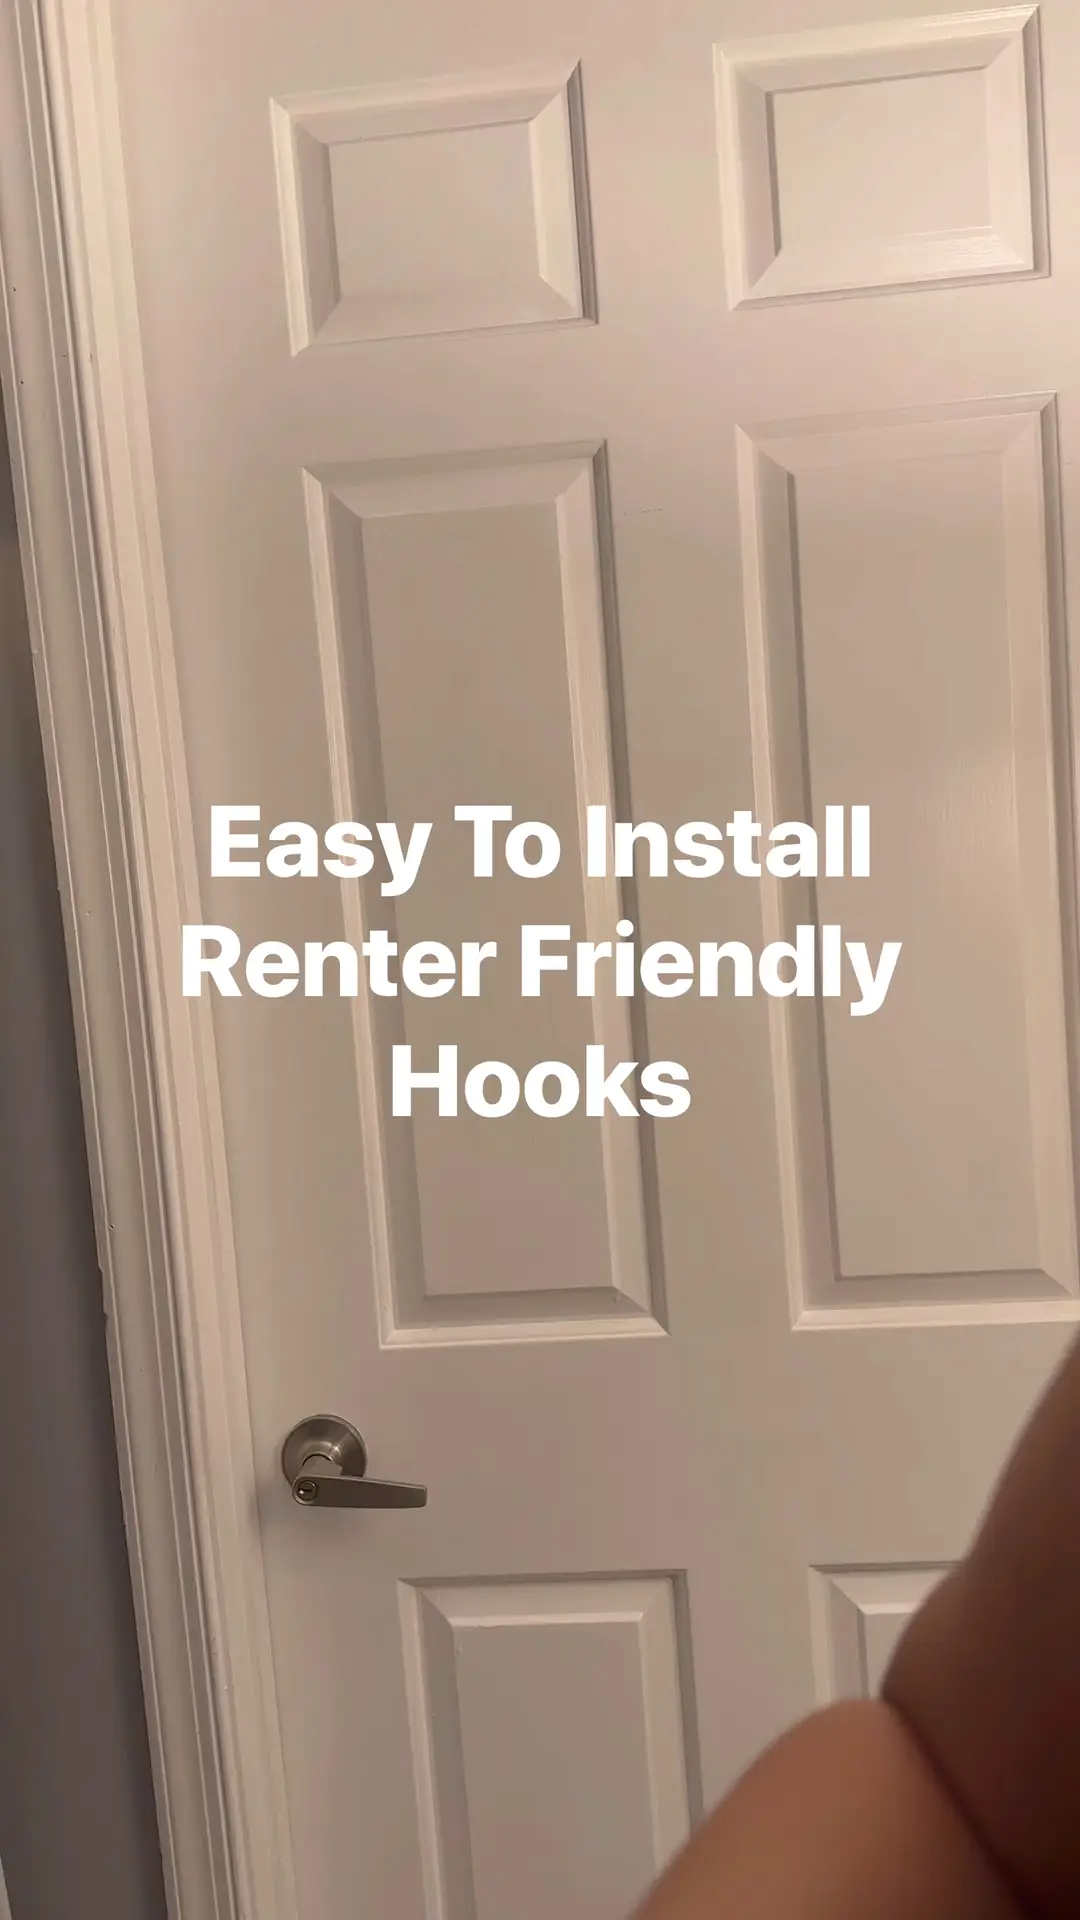 Renter Friendly Hooks, Video published by FashionKnow